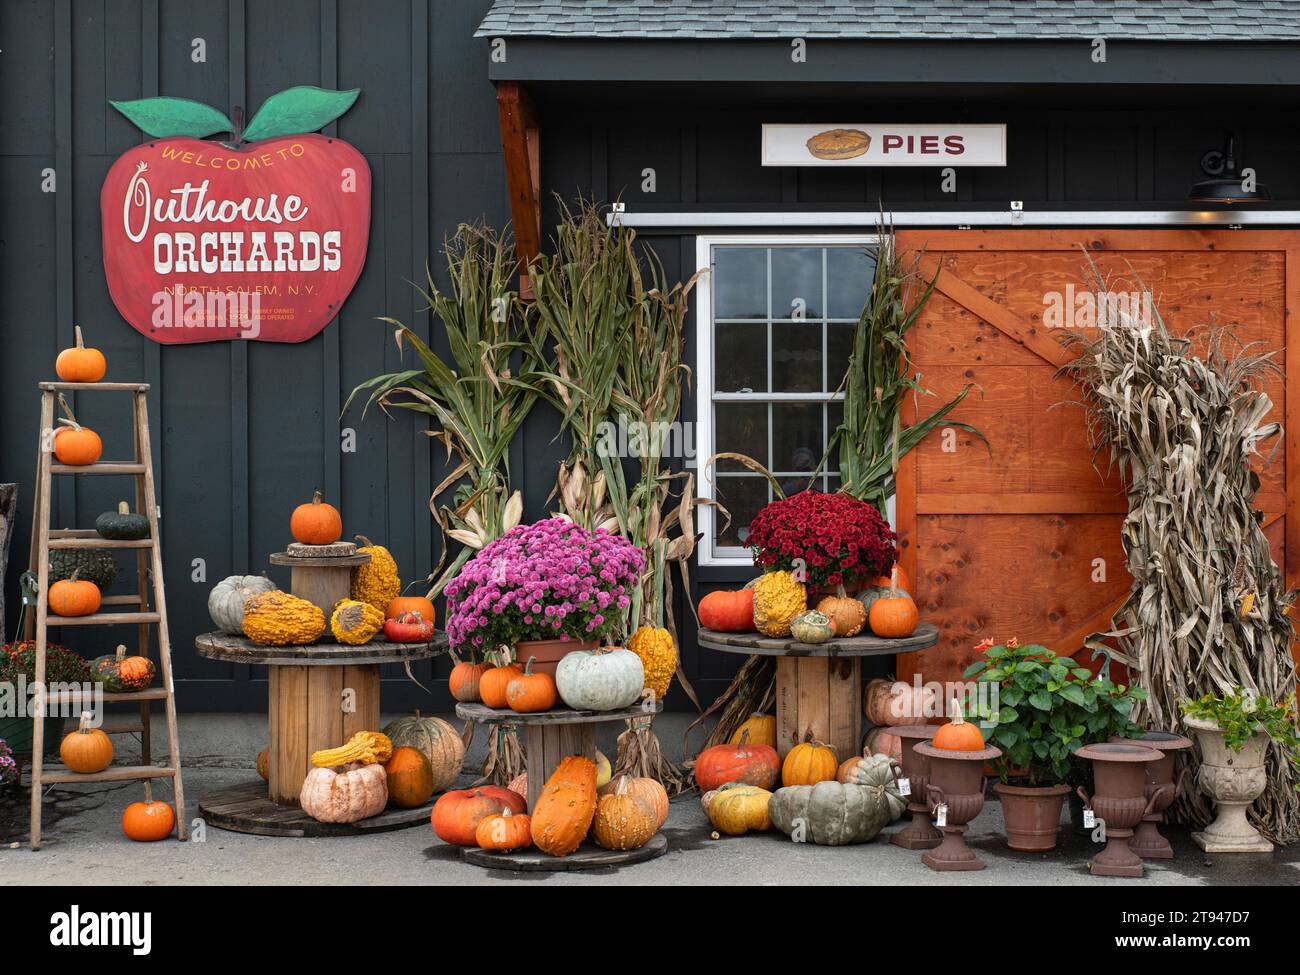 Willkommen in Outhouse Orchards, North Salem, New York. Stockfoto